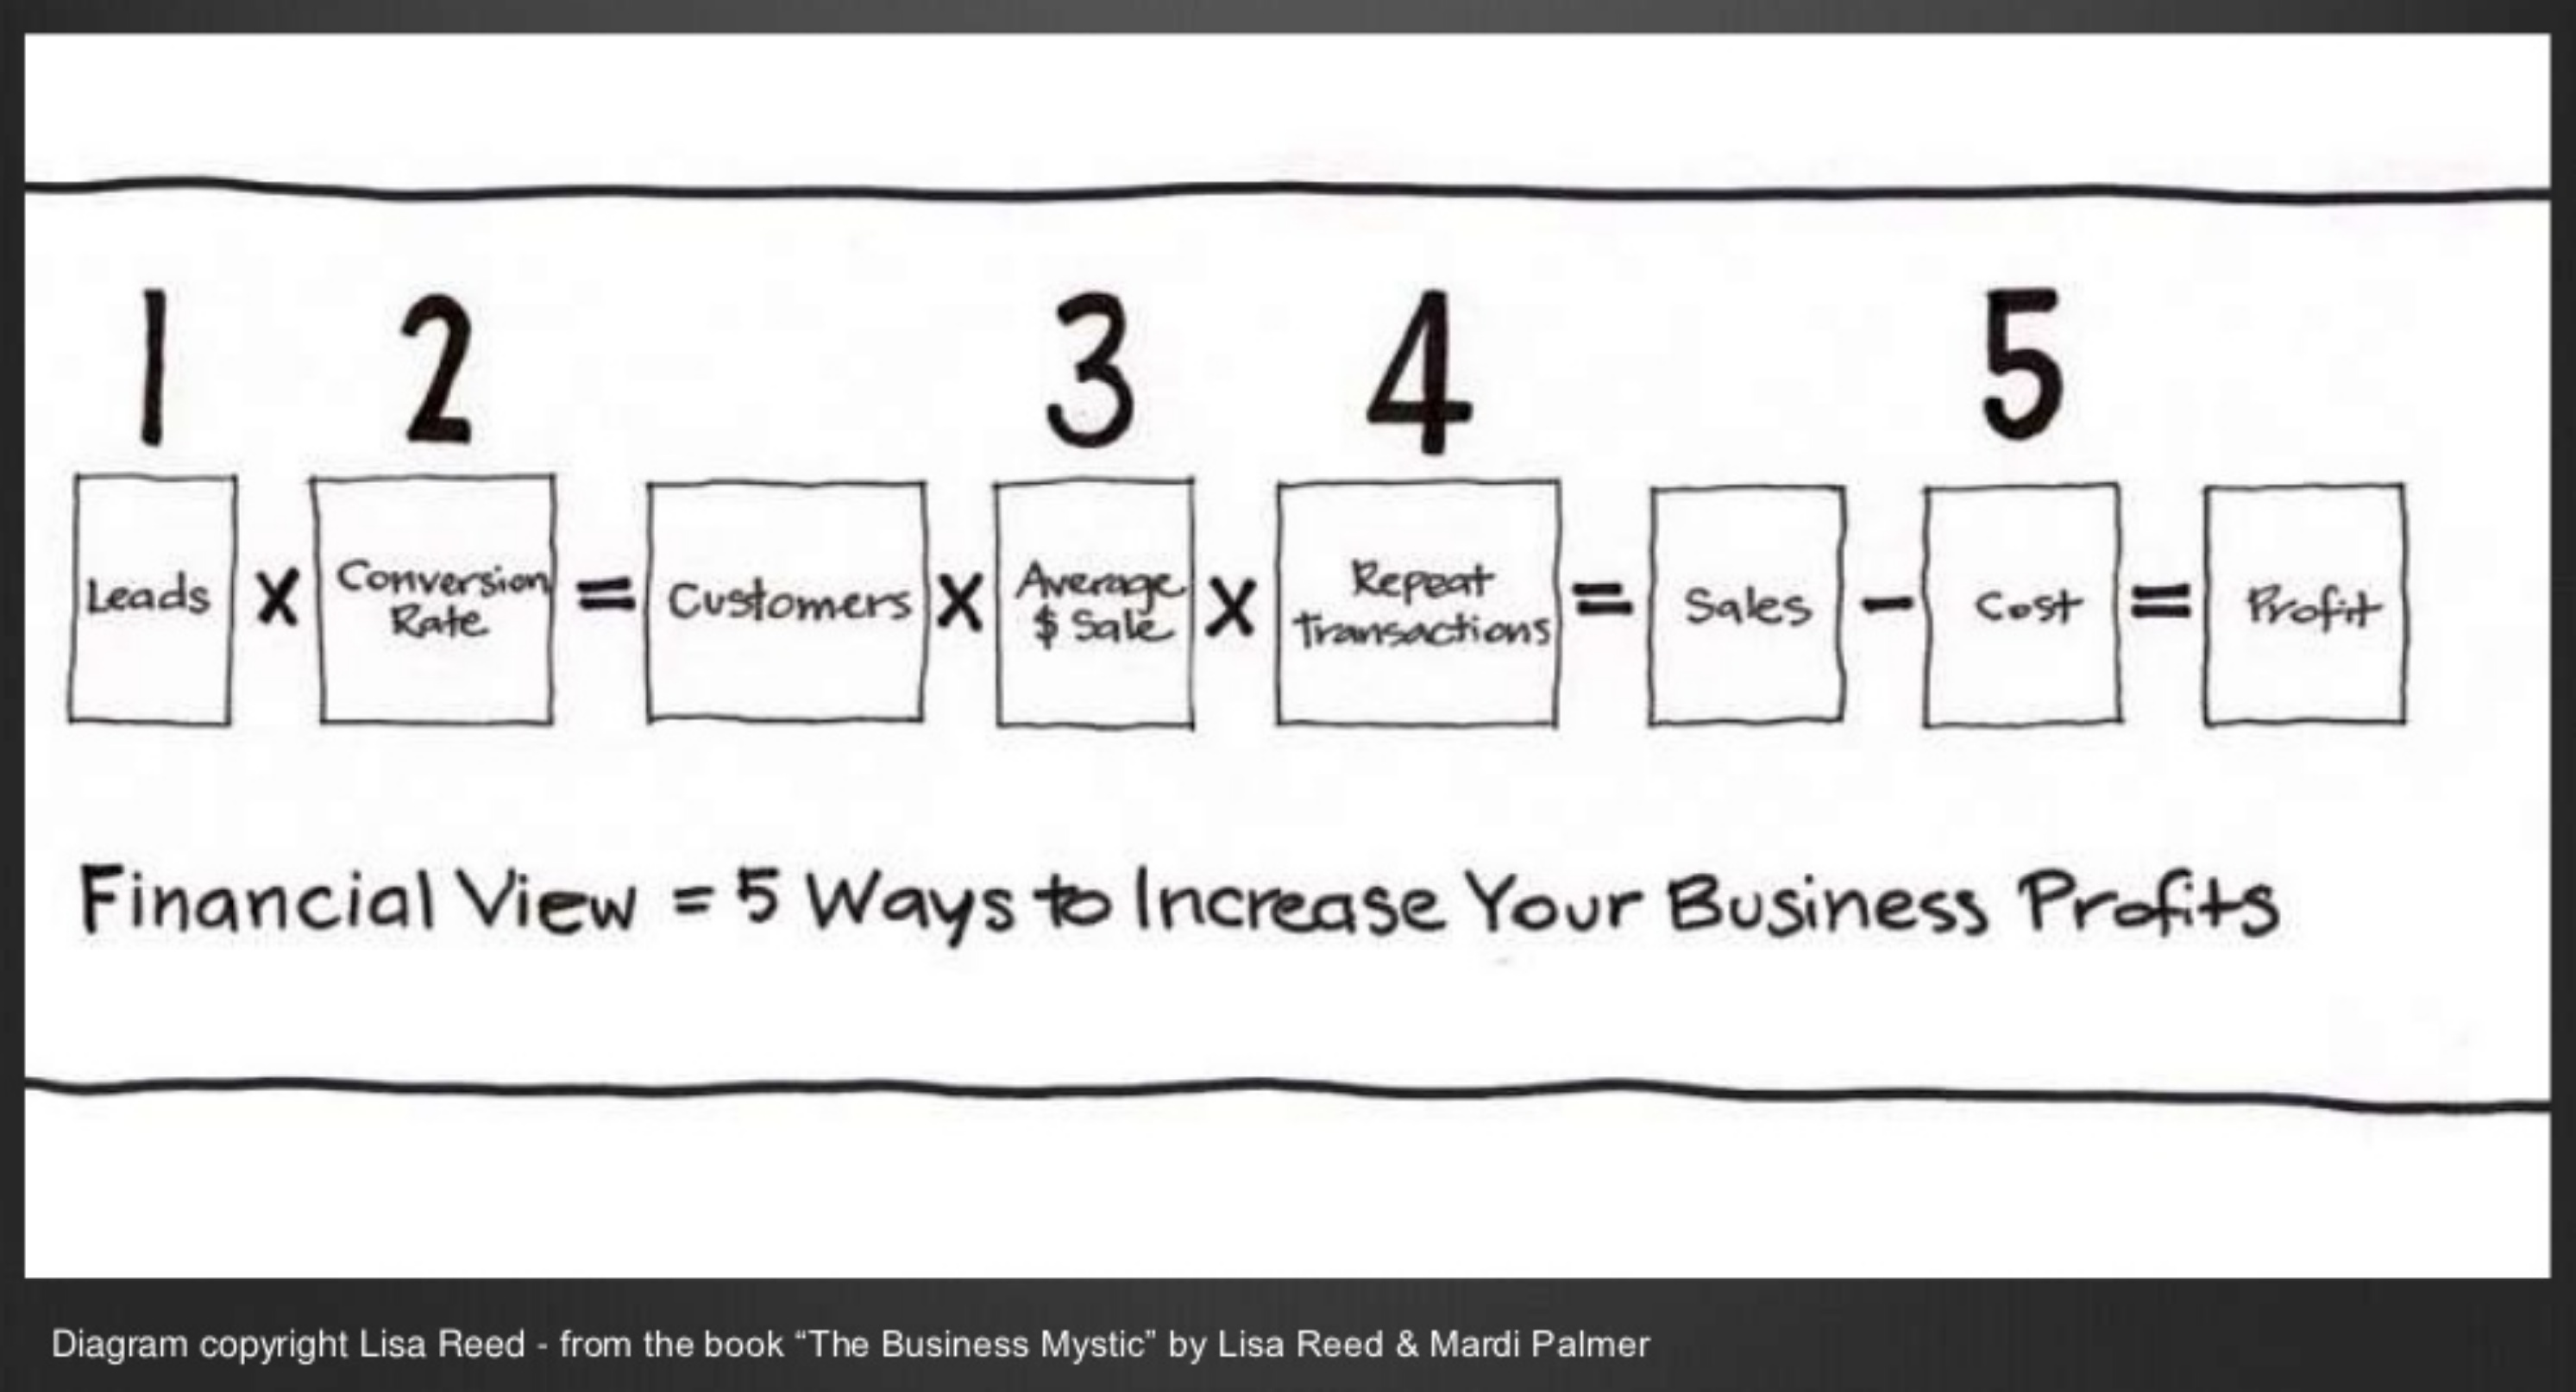 The 5 ways financial model - 5 areas to focus on to increase your business profits